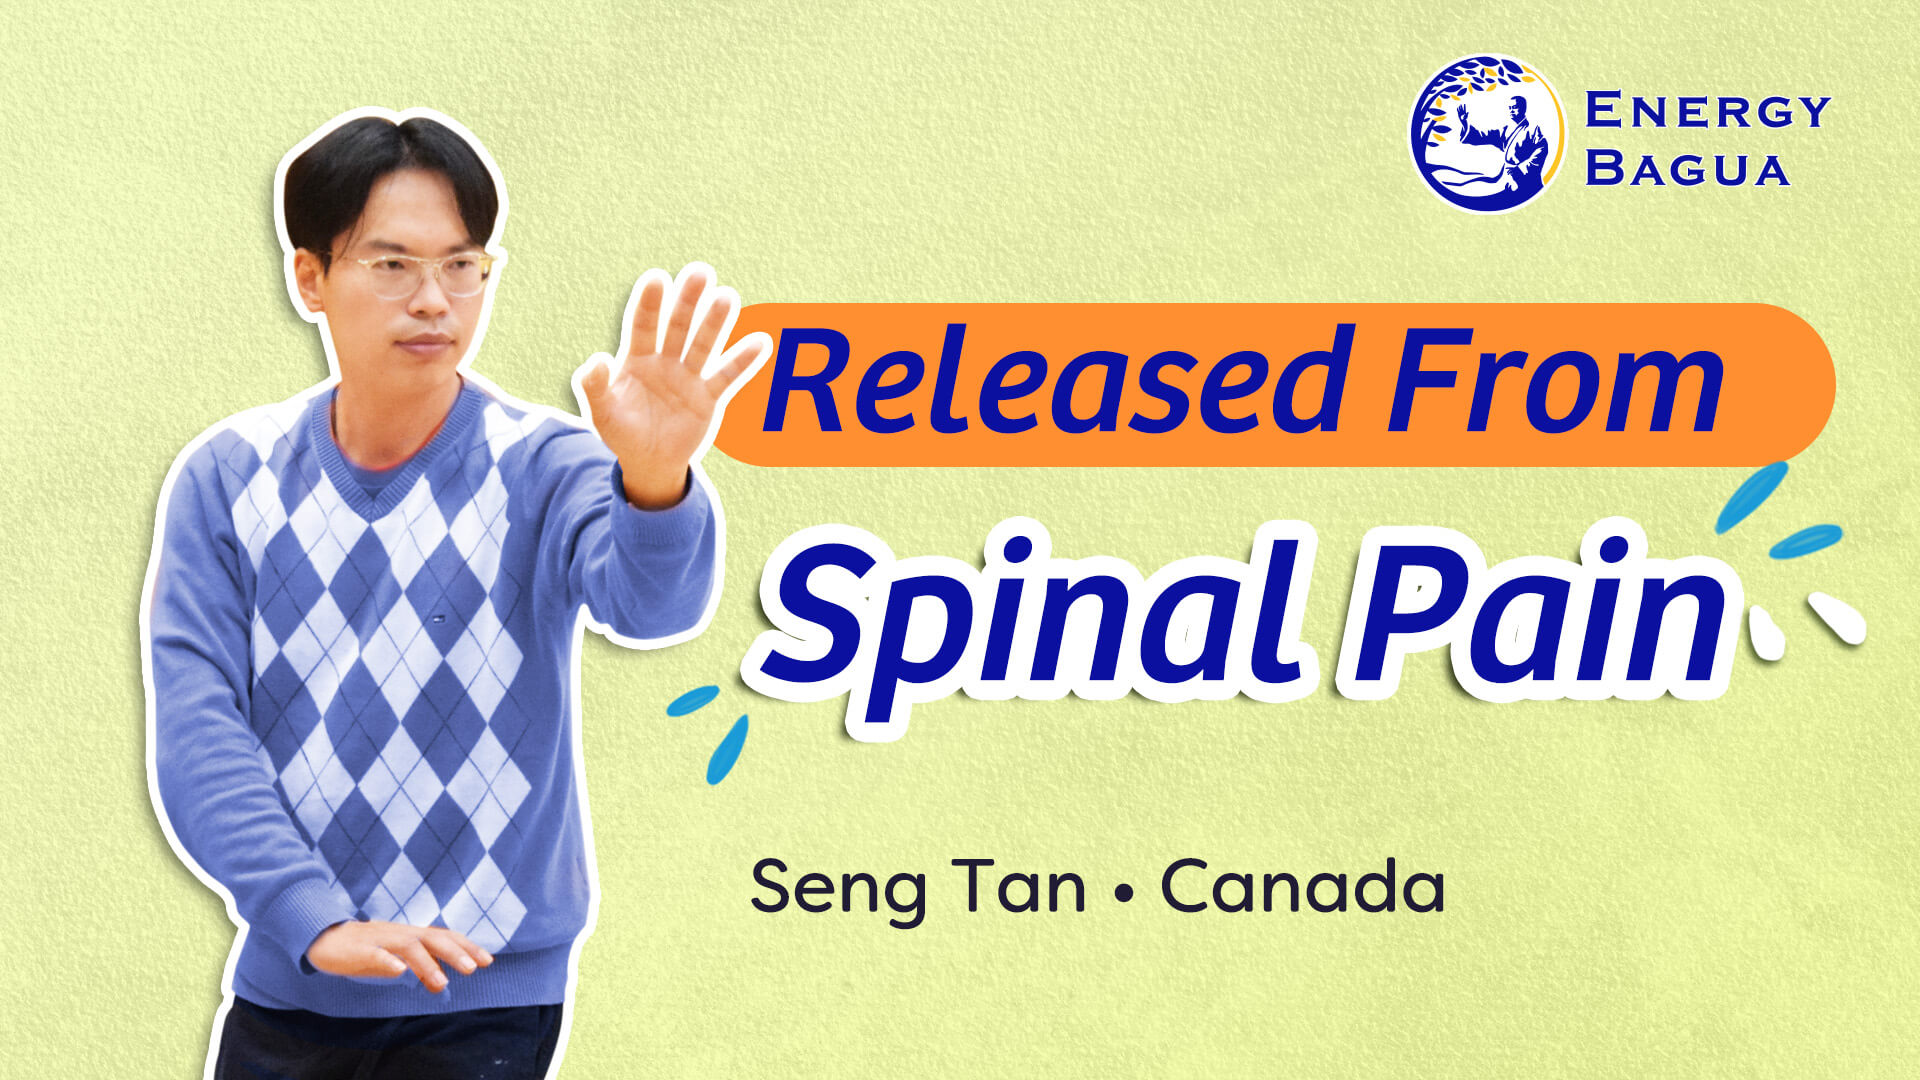 Released From Spinal Pain